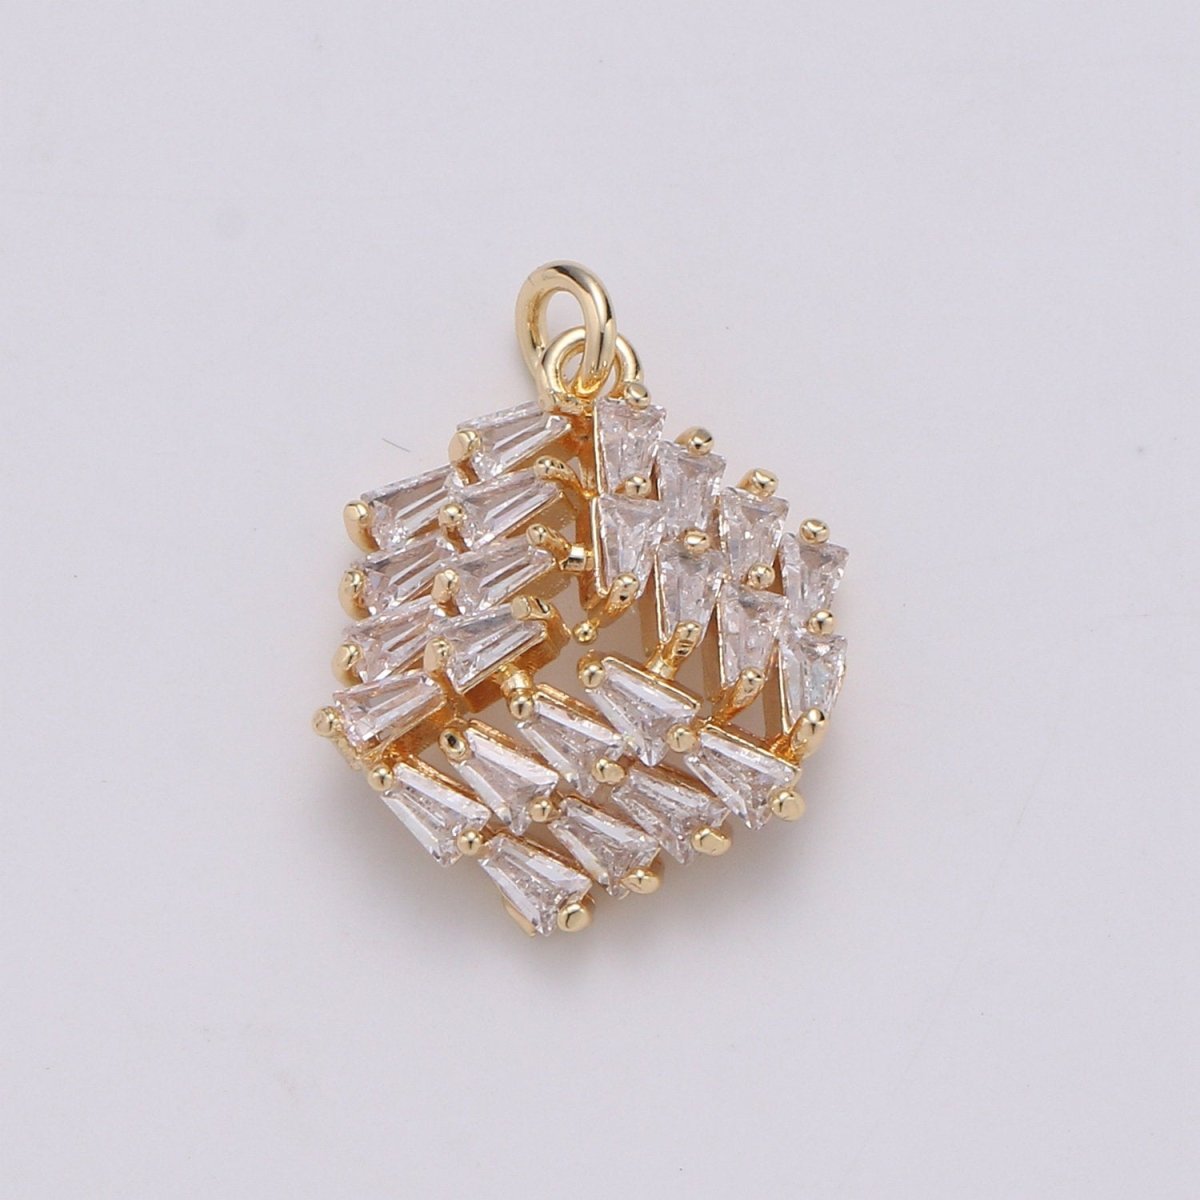 24K Gold Filled 3D Box Baguette Charm, Micro Pave Cubic Zirconia Cube Charm, Clear Cubic Charms, DIY Jewelry Supply E-558 - DLUXCA